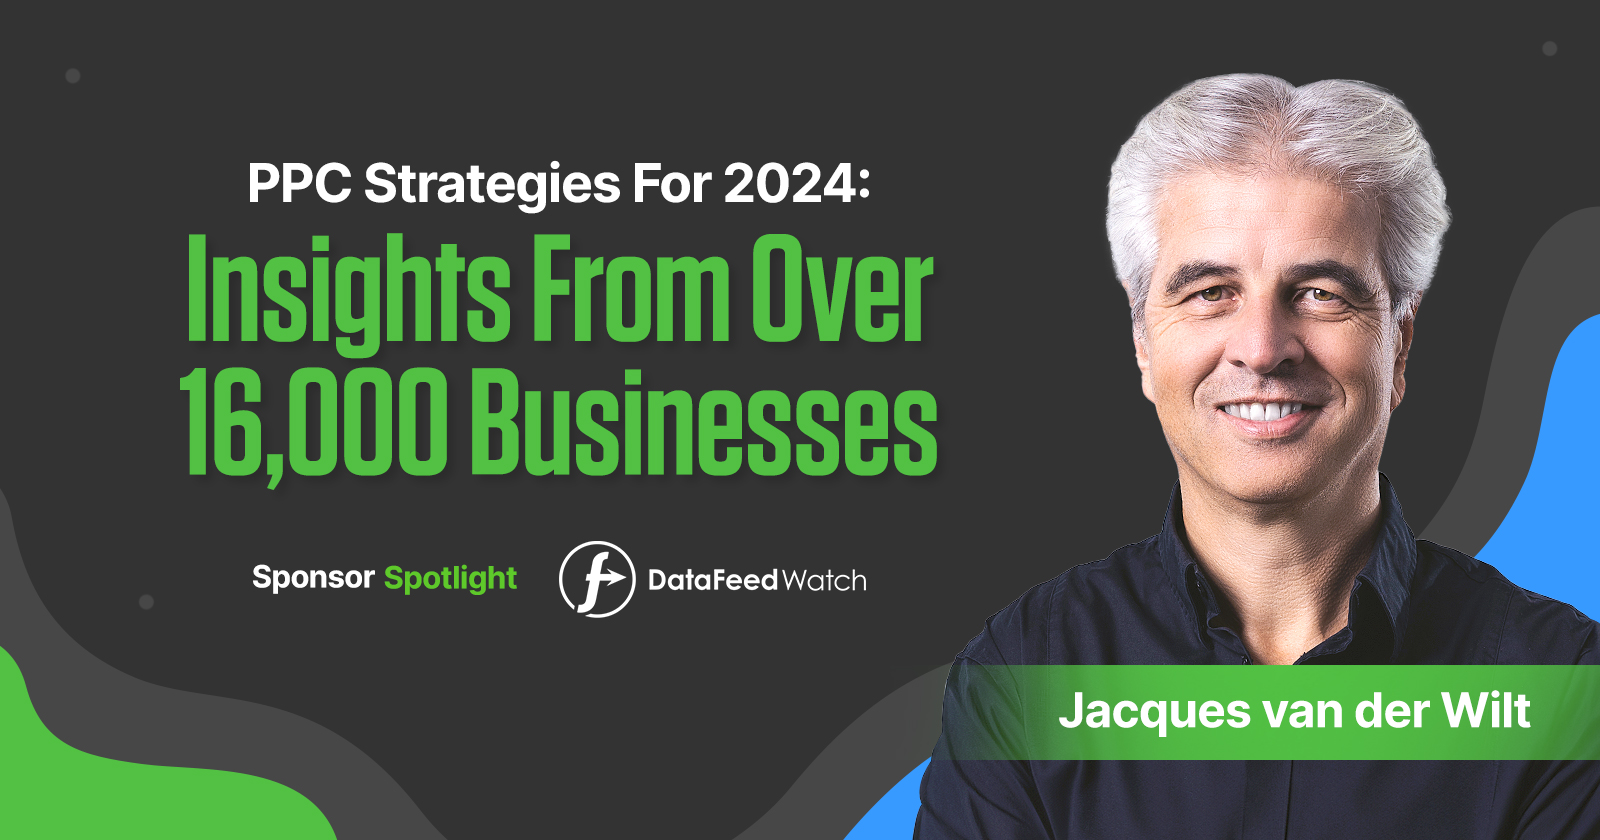 PPC Strategies For 2024: Insights From Over 16,000 Businesses